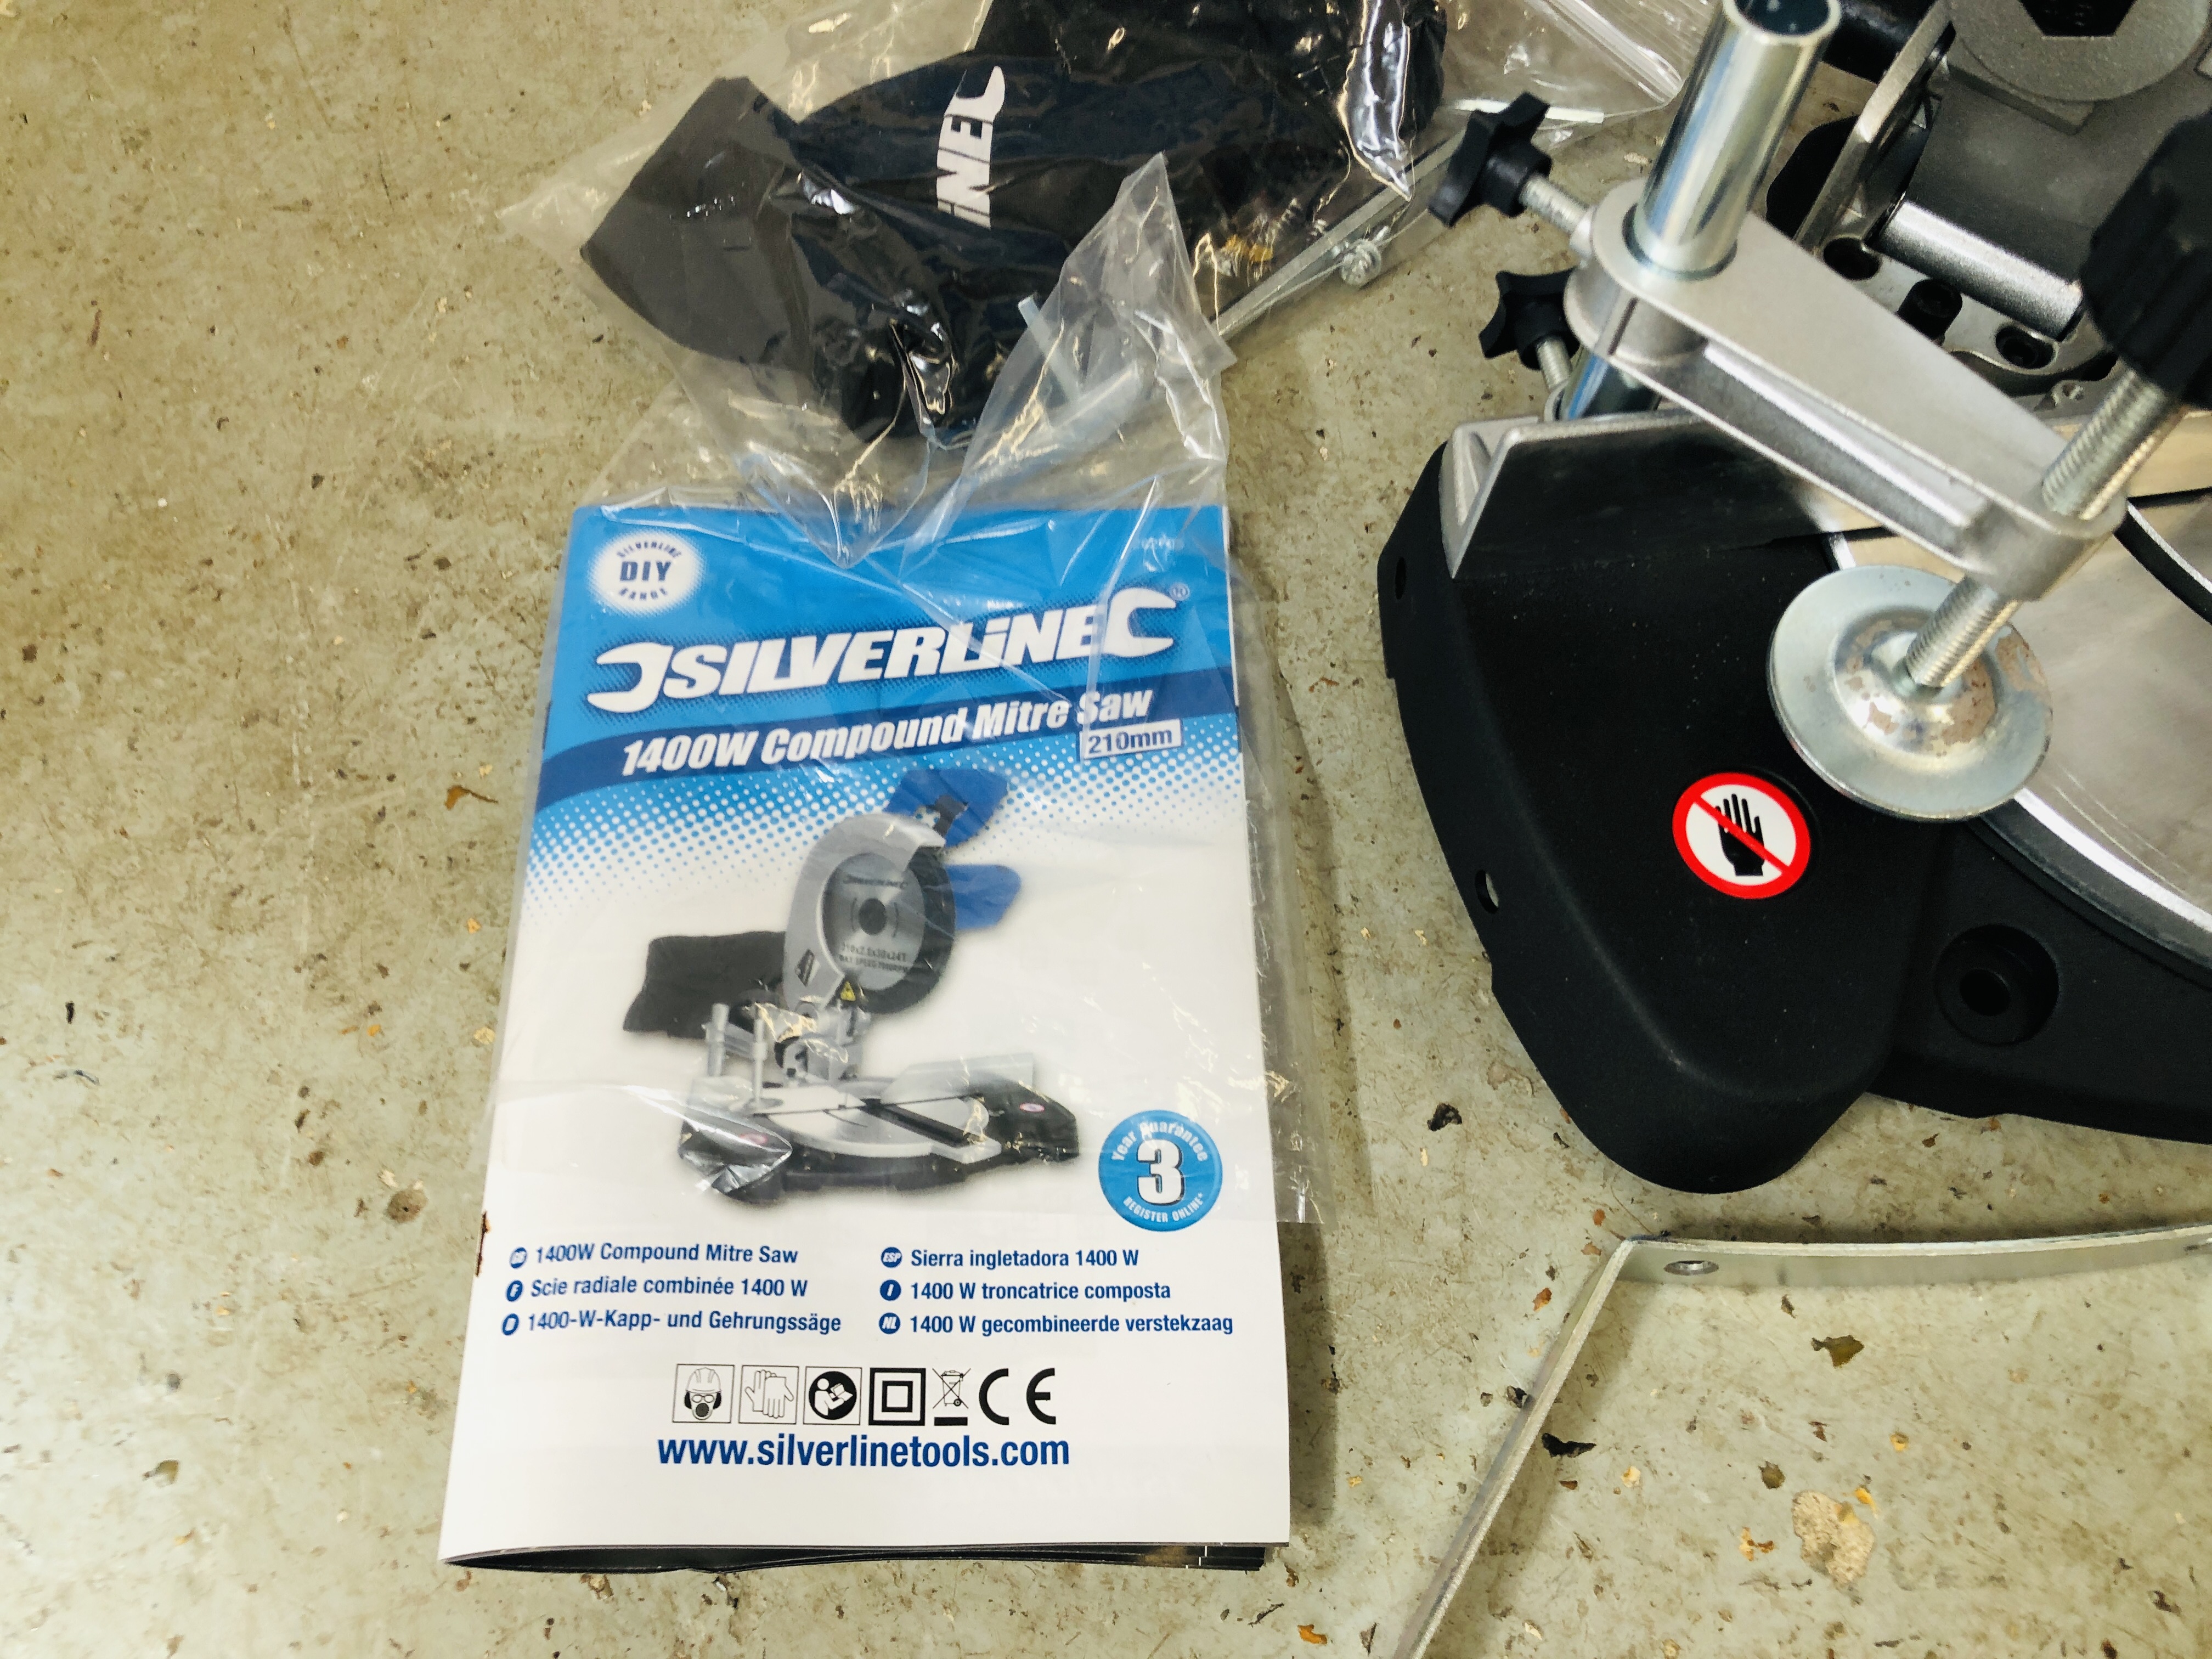 A SILVERLINE 210MM 1400W COMPOUND MITRE SAW (AS NEW) - SOLD AS SEEN. - Image 3 of 3